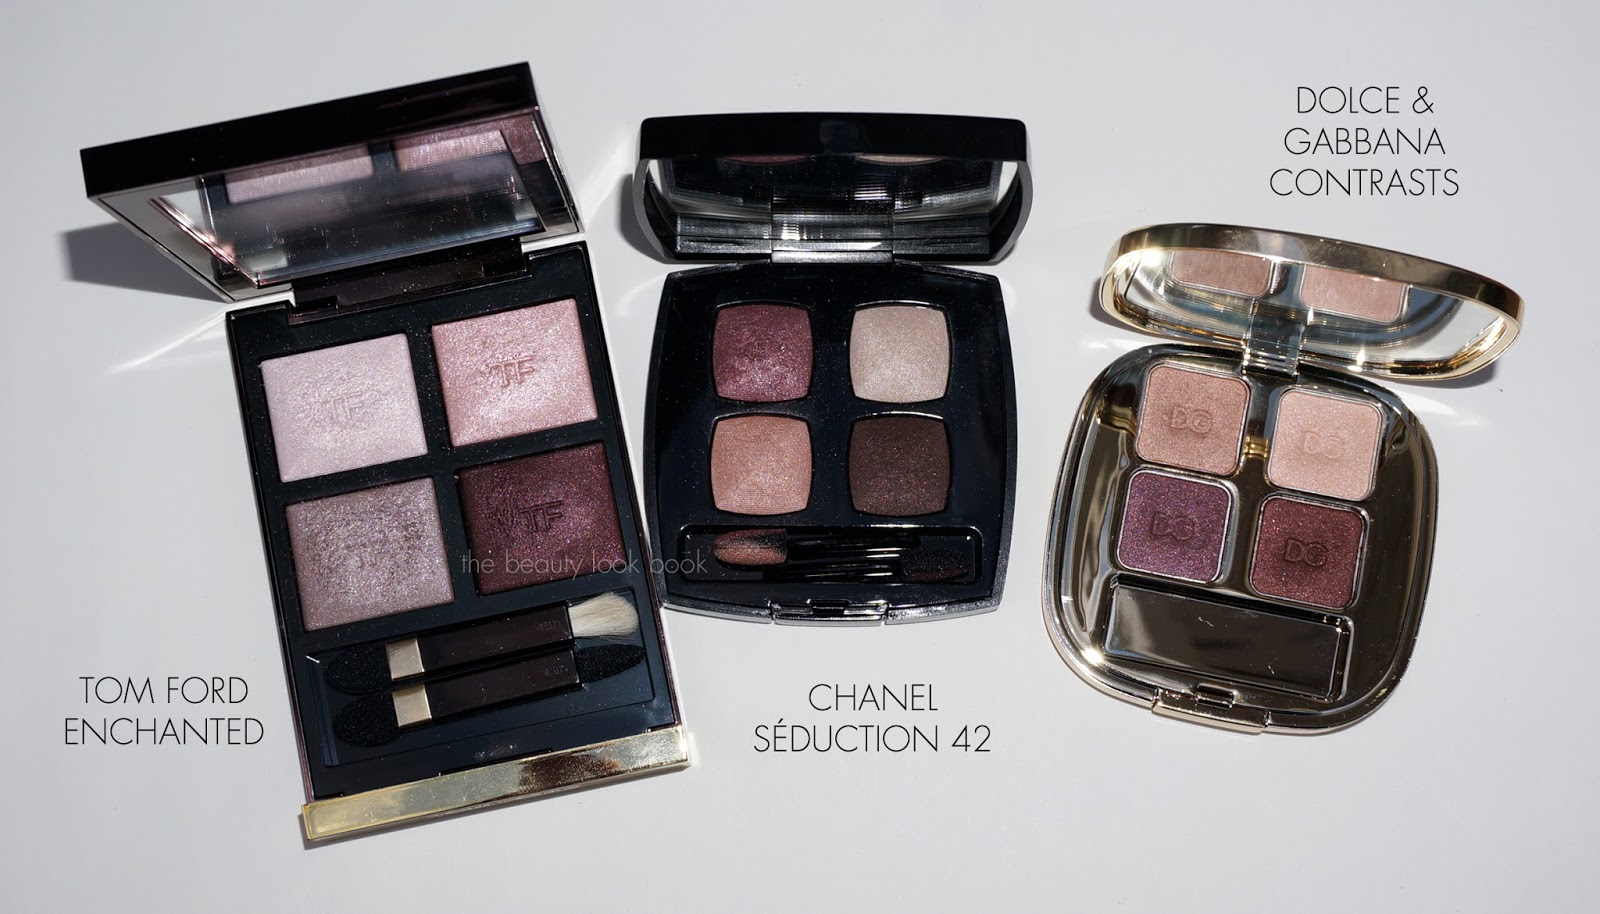 Chanel Tisse Fantaisie 236 Les 4 Ombres - Ang Savvy